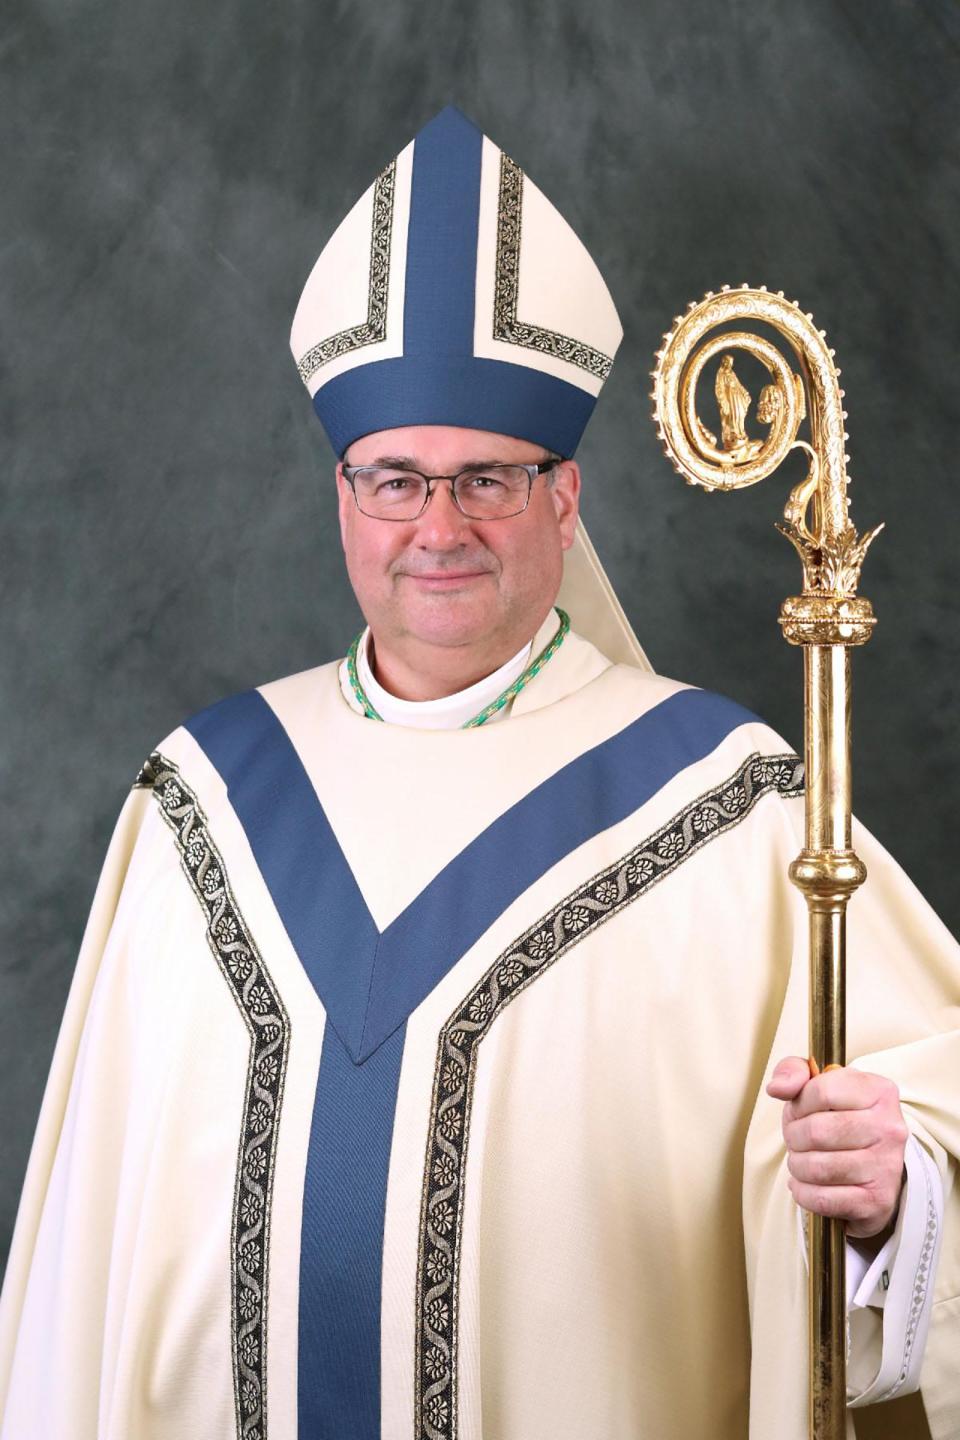 The Most Rev. Richard G. Henning officially became the ninth bishop of the Diocese of Providence on May 1, succeeding Bishop Thomas J. Tobin upon his retirement.